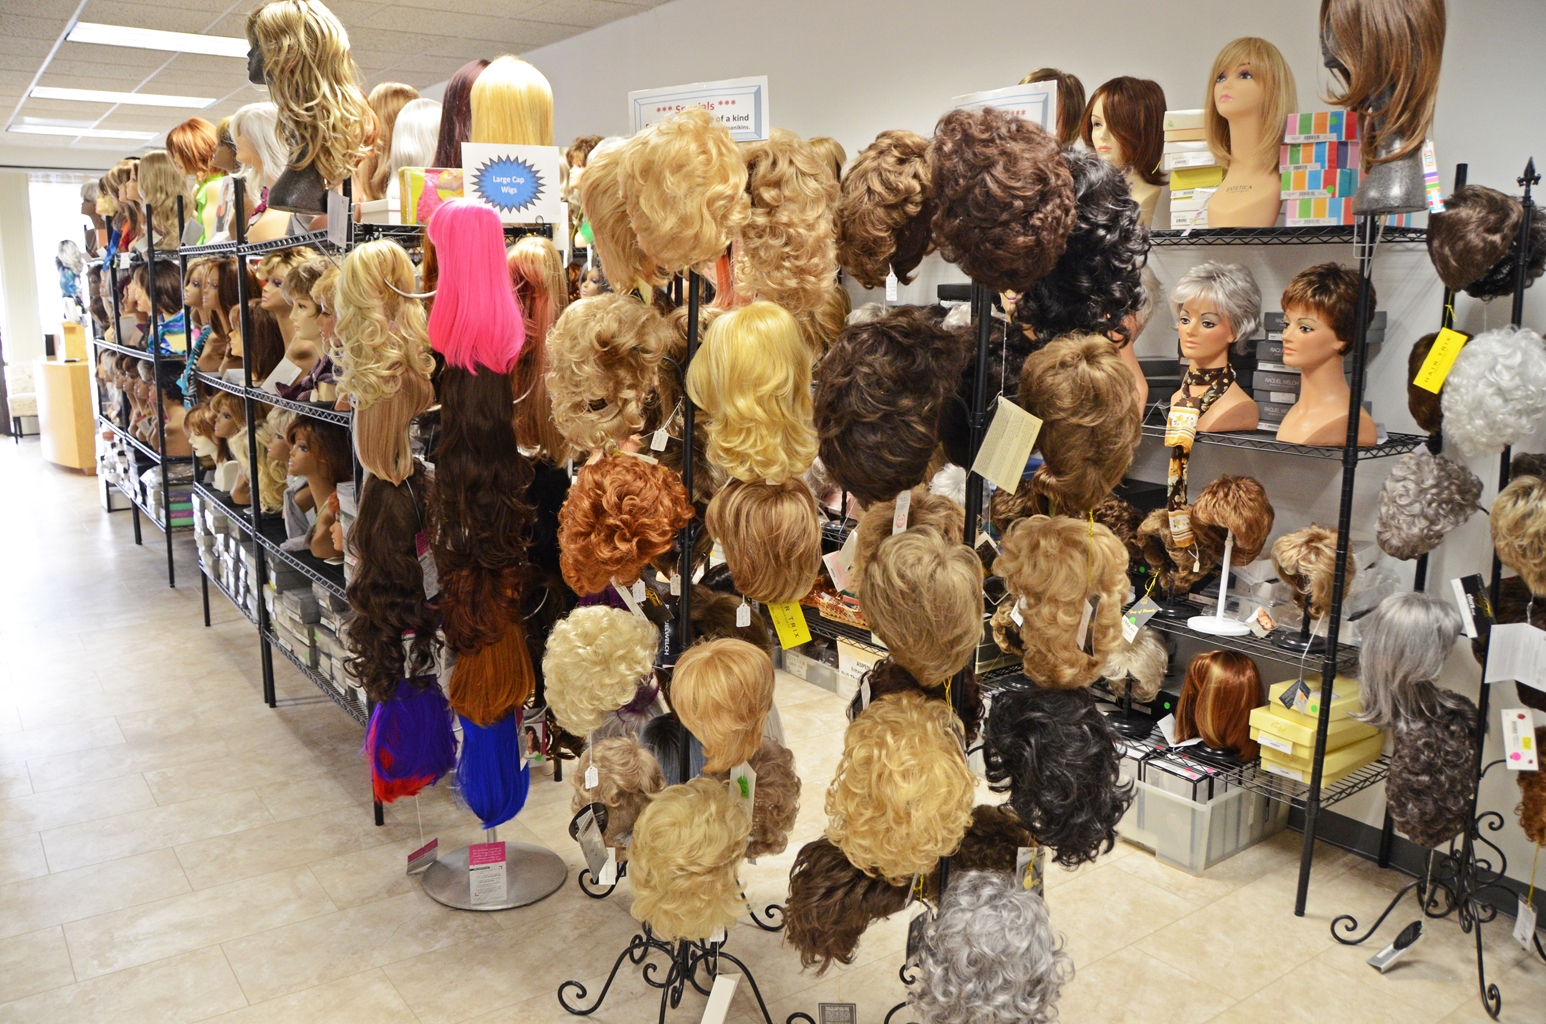 Wigs & More has been purchased by Wig Wam Boutique & Get Wiggy